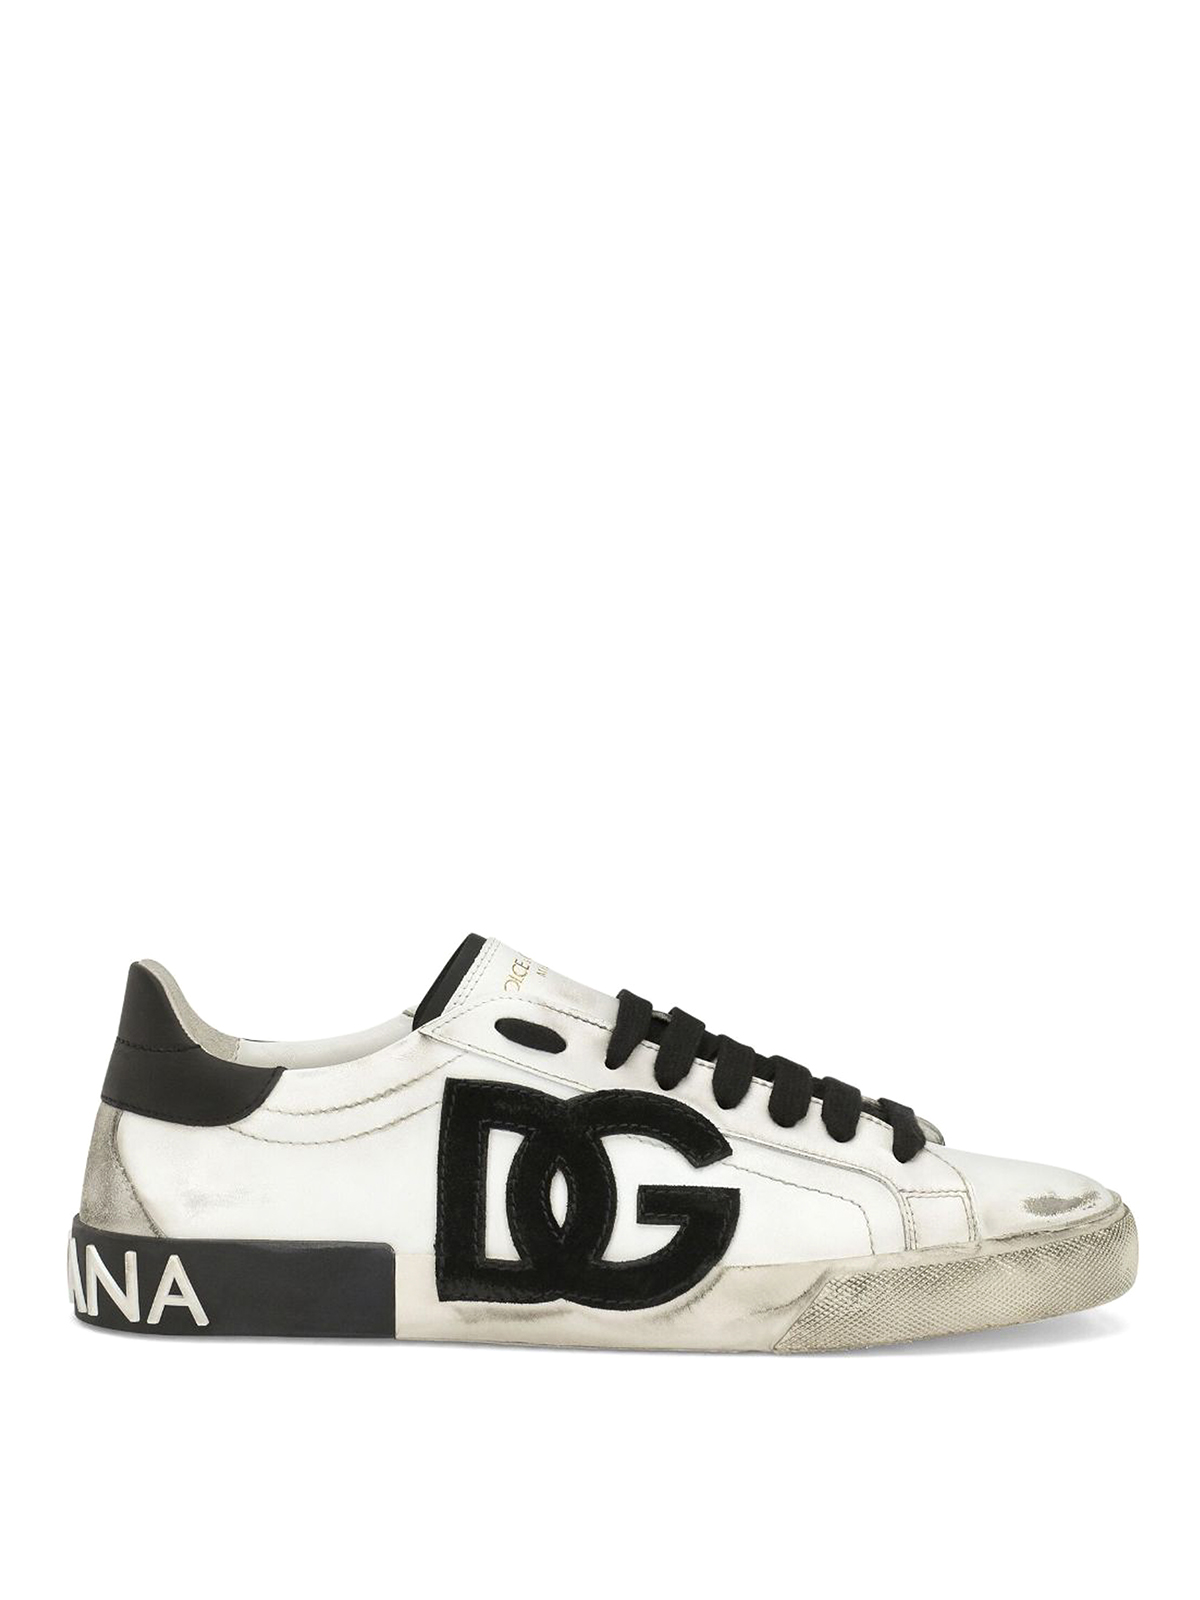 Dolce & Gabbana Logo Leather Sneakers In White